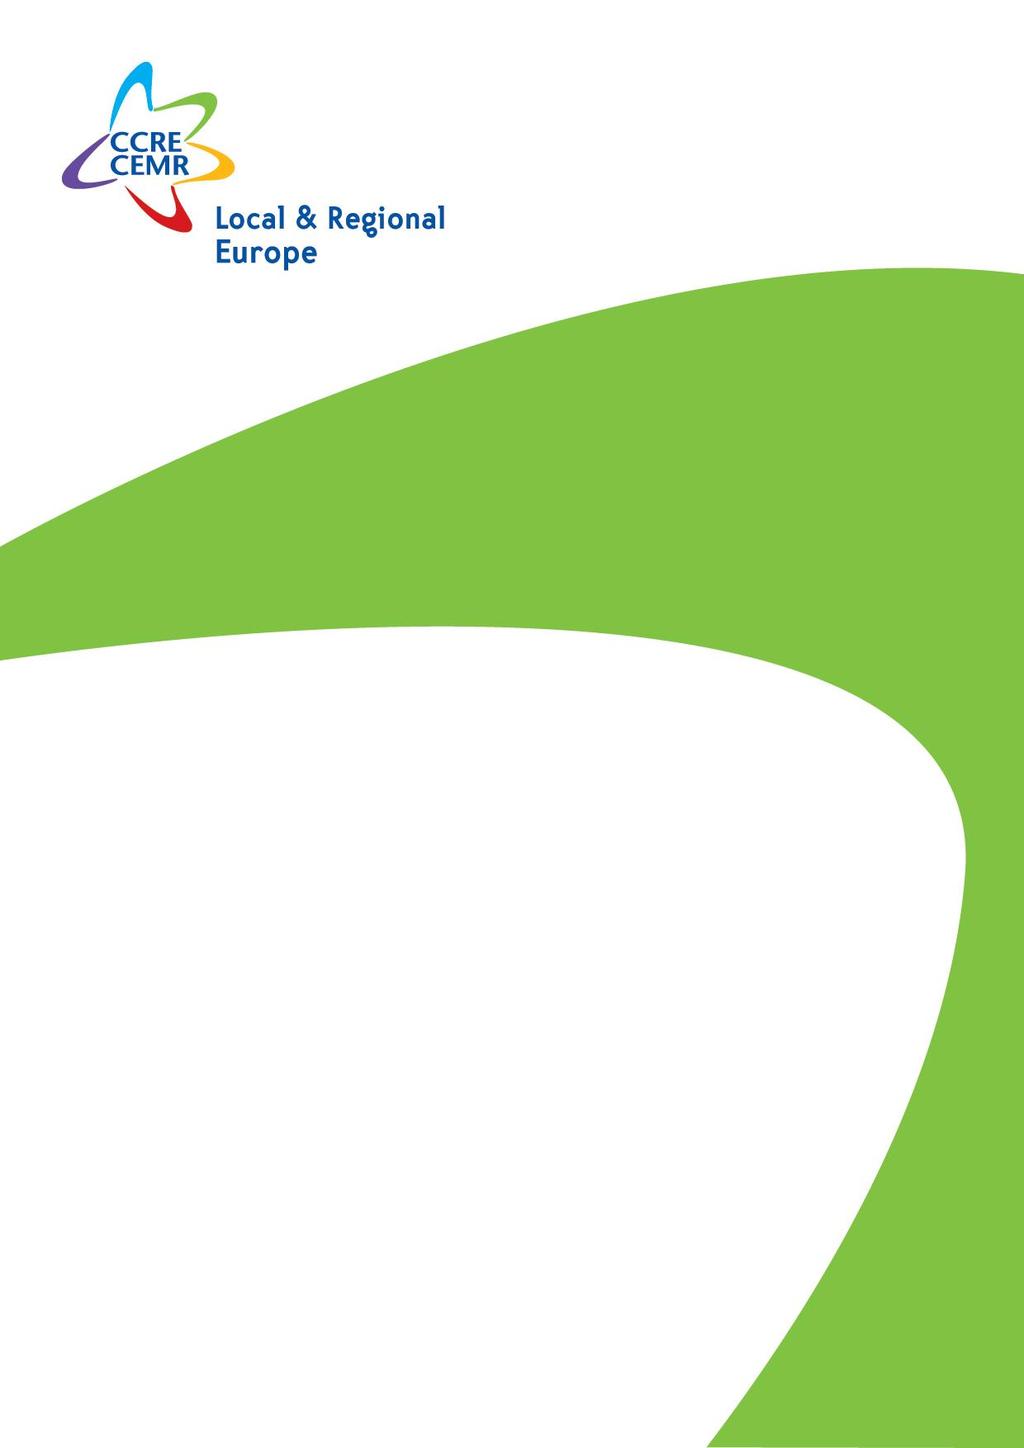 Paris Summit on climate change: Municipalities and regions as catalysts for success September 2015 Council of